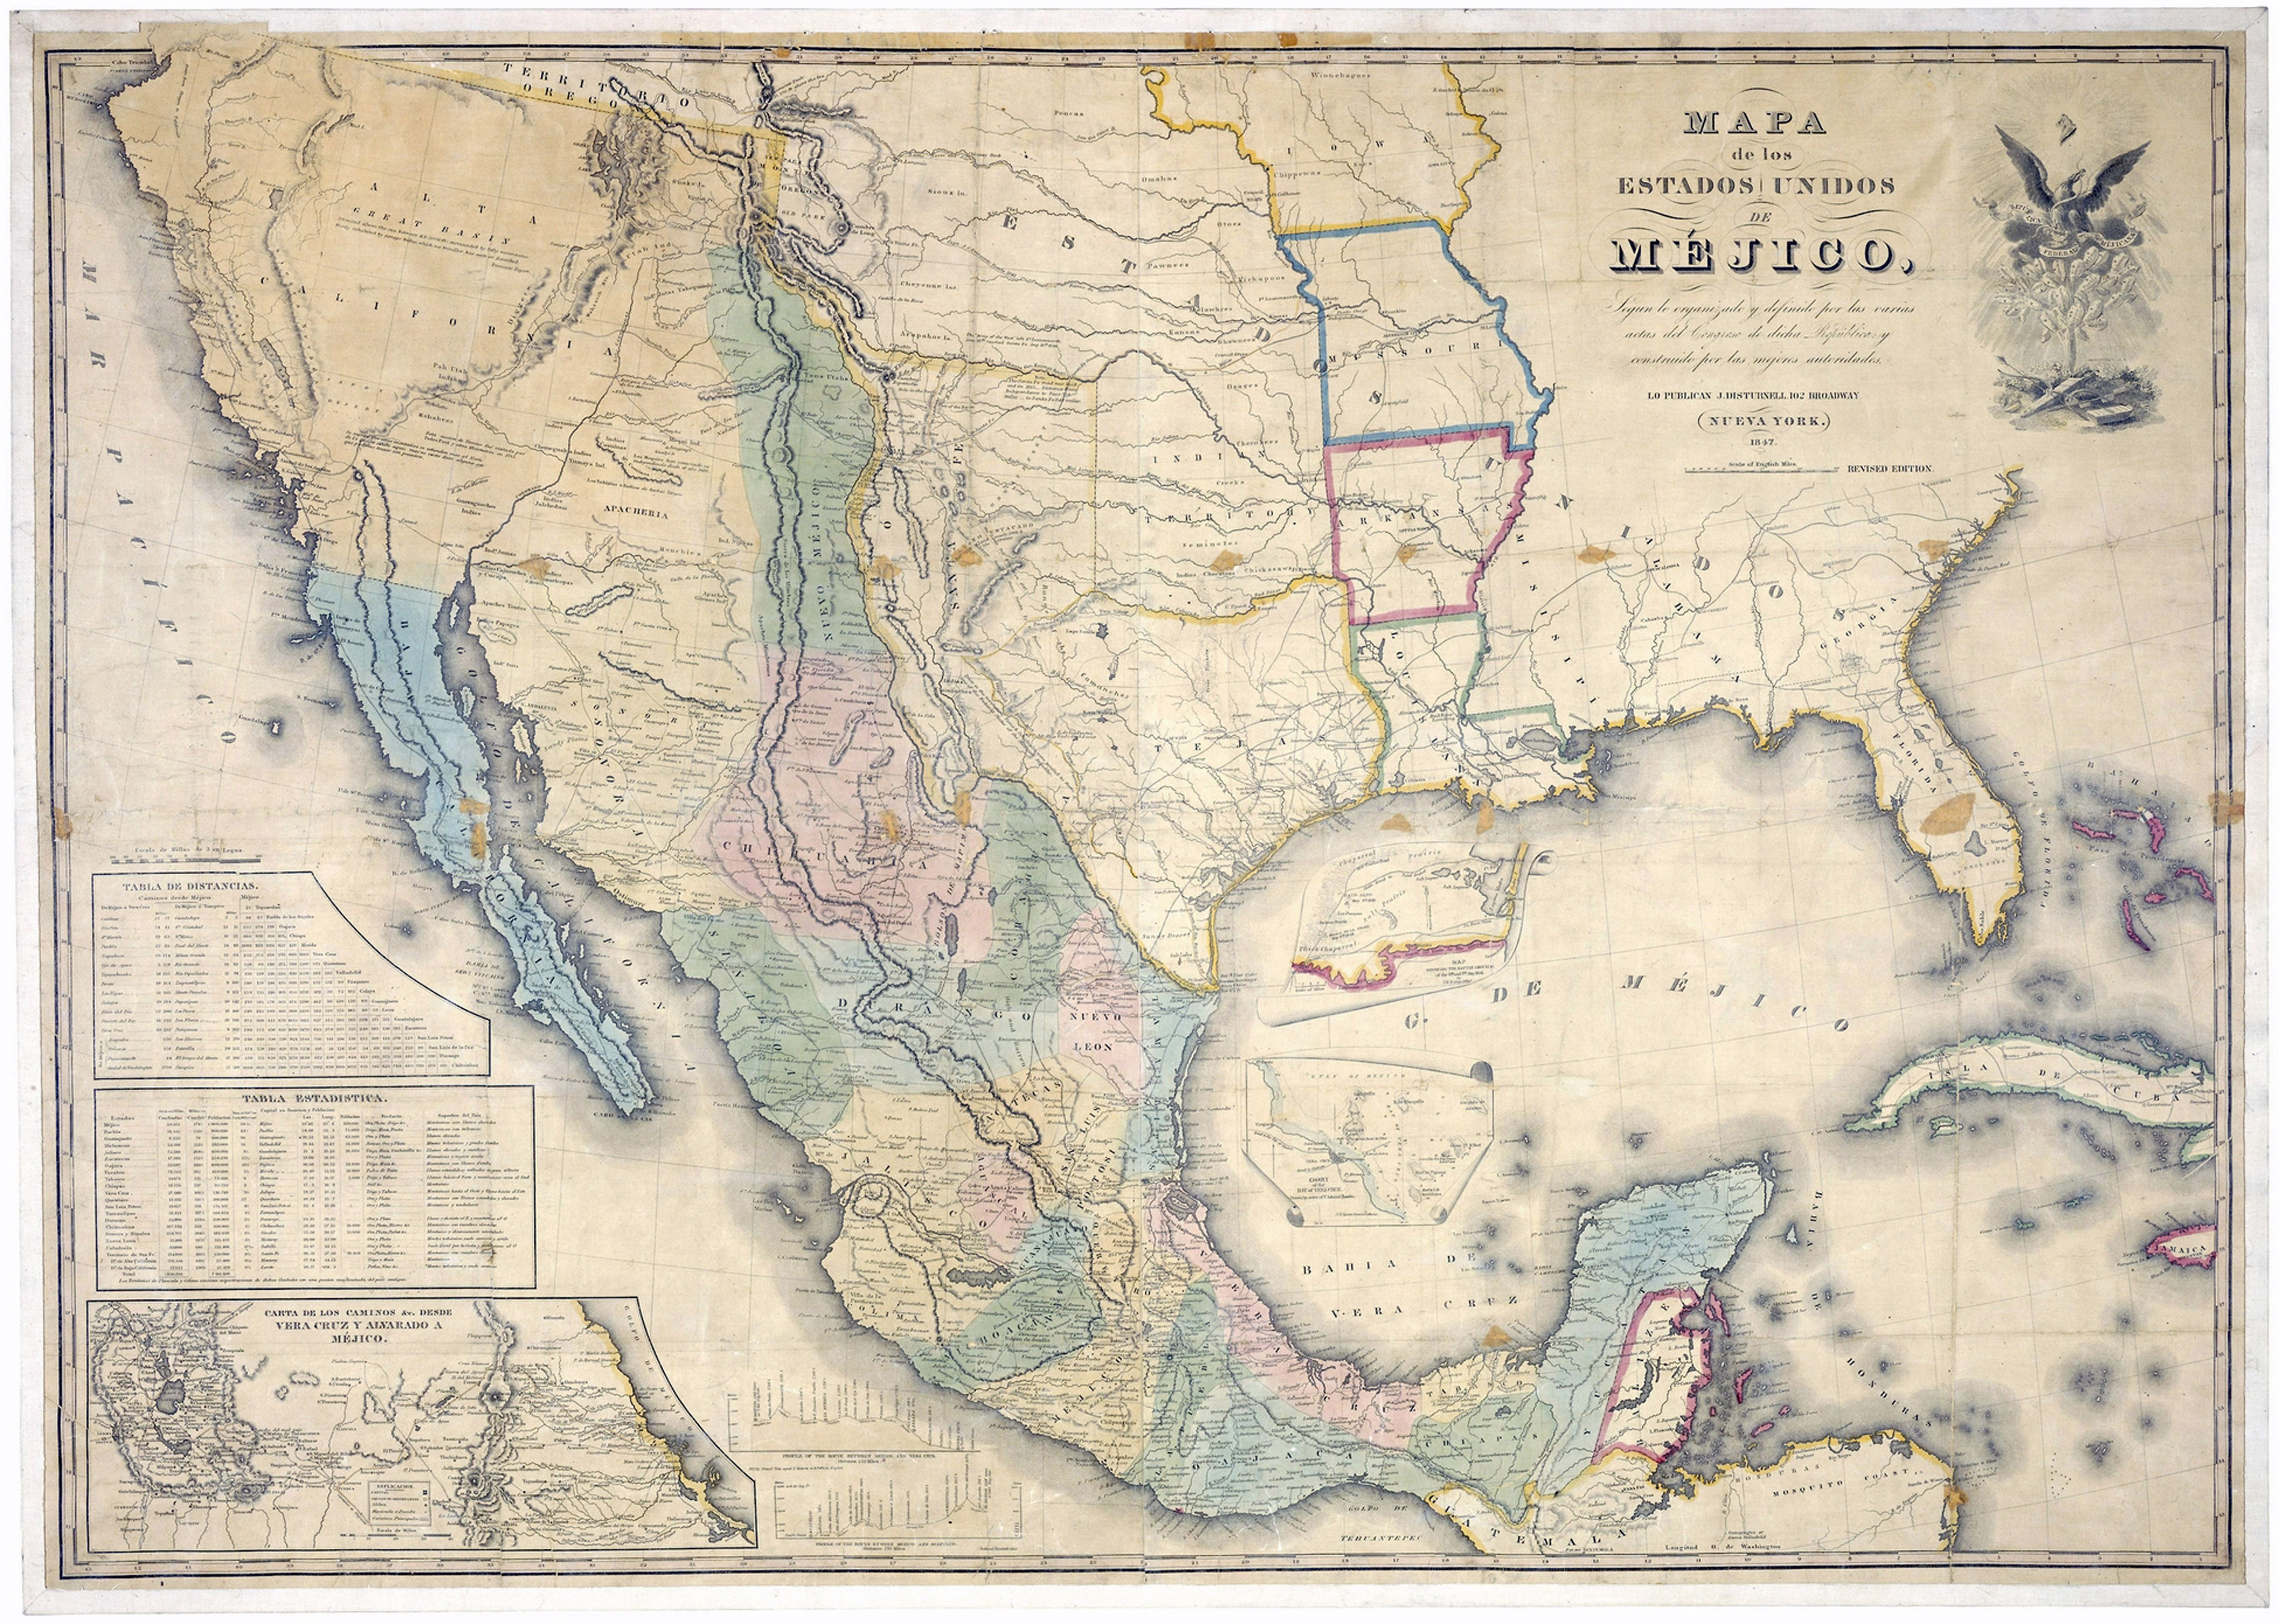  Map of the United States of Mexico, 1847 published by J Disturnall. This was appended to the Treaty of Guadalupe-Hidalgo.